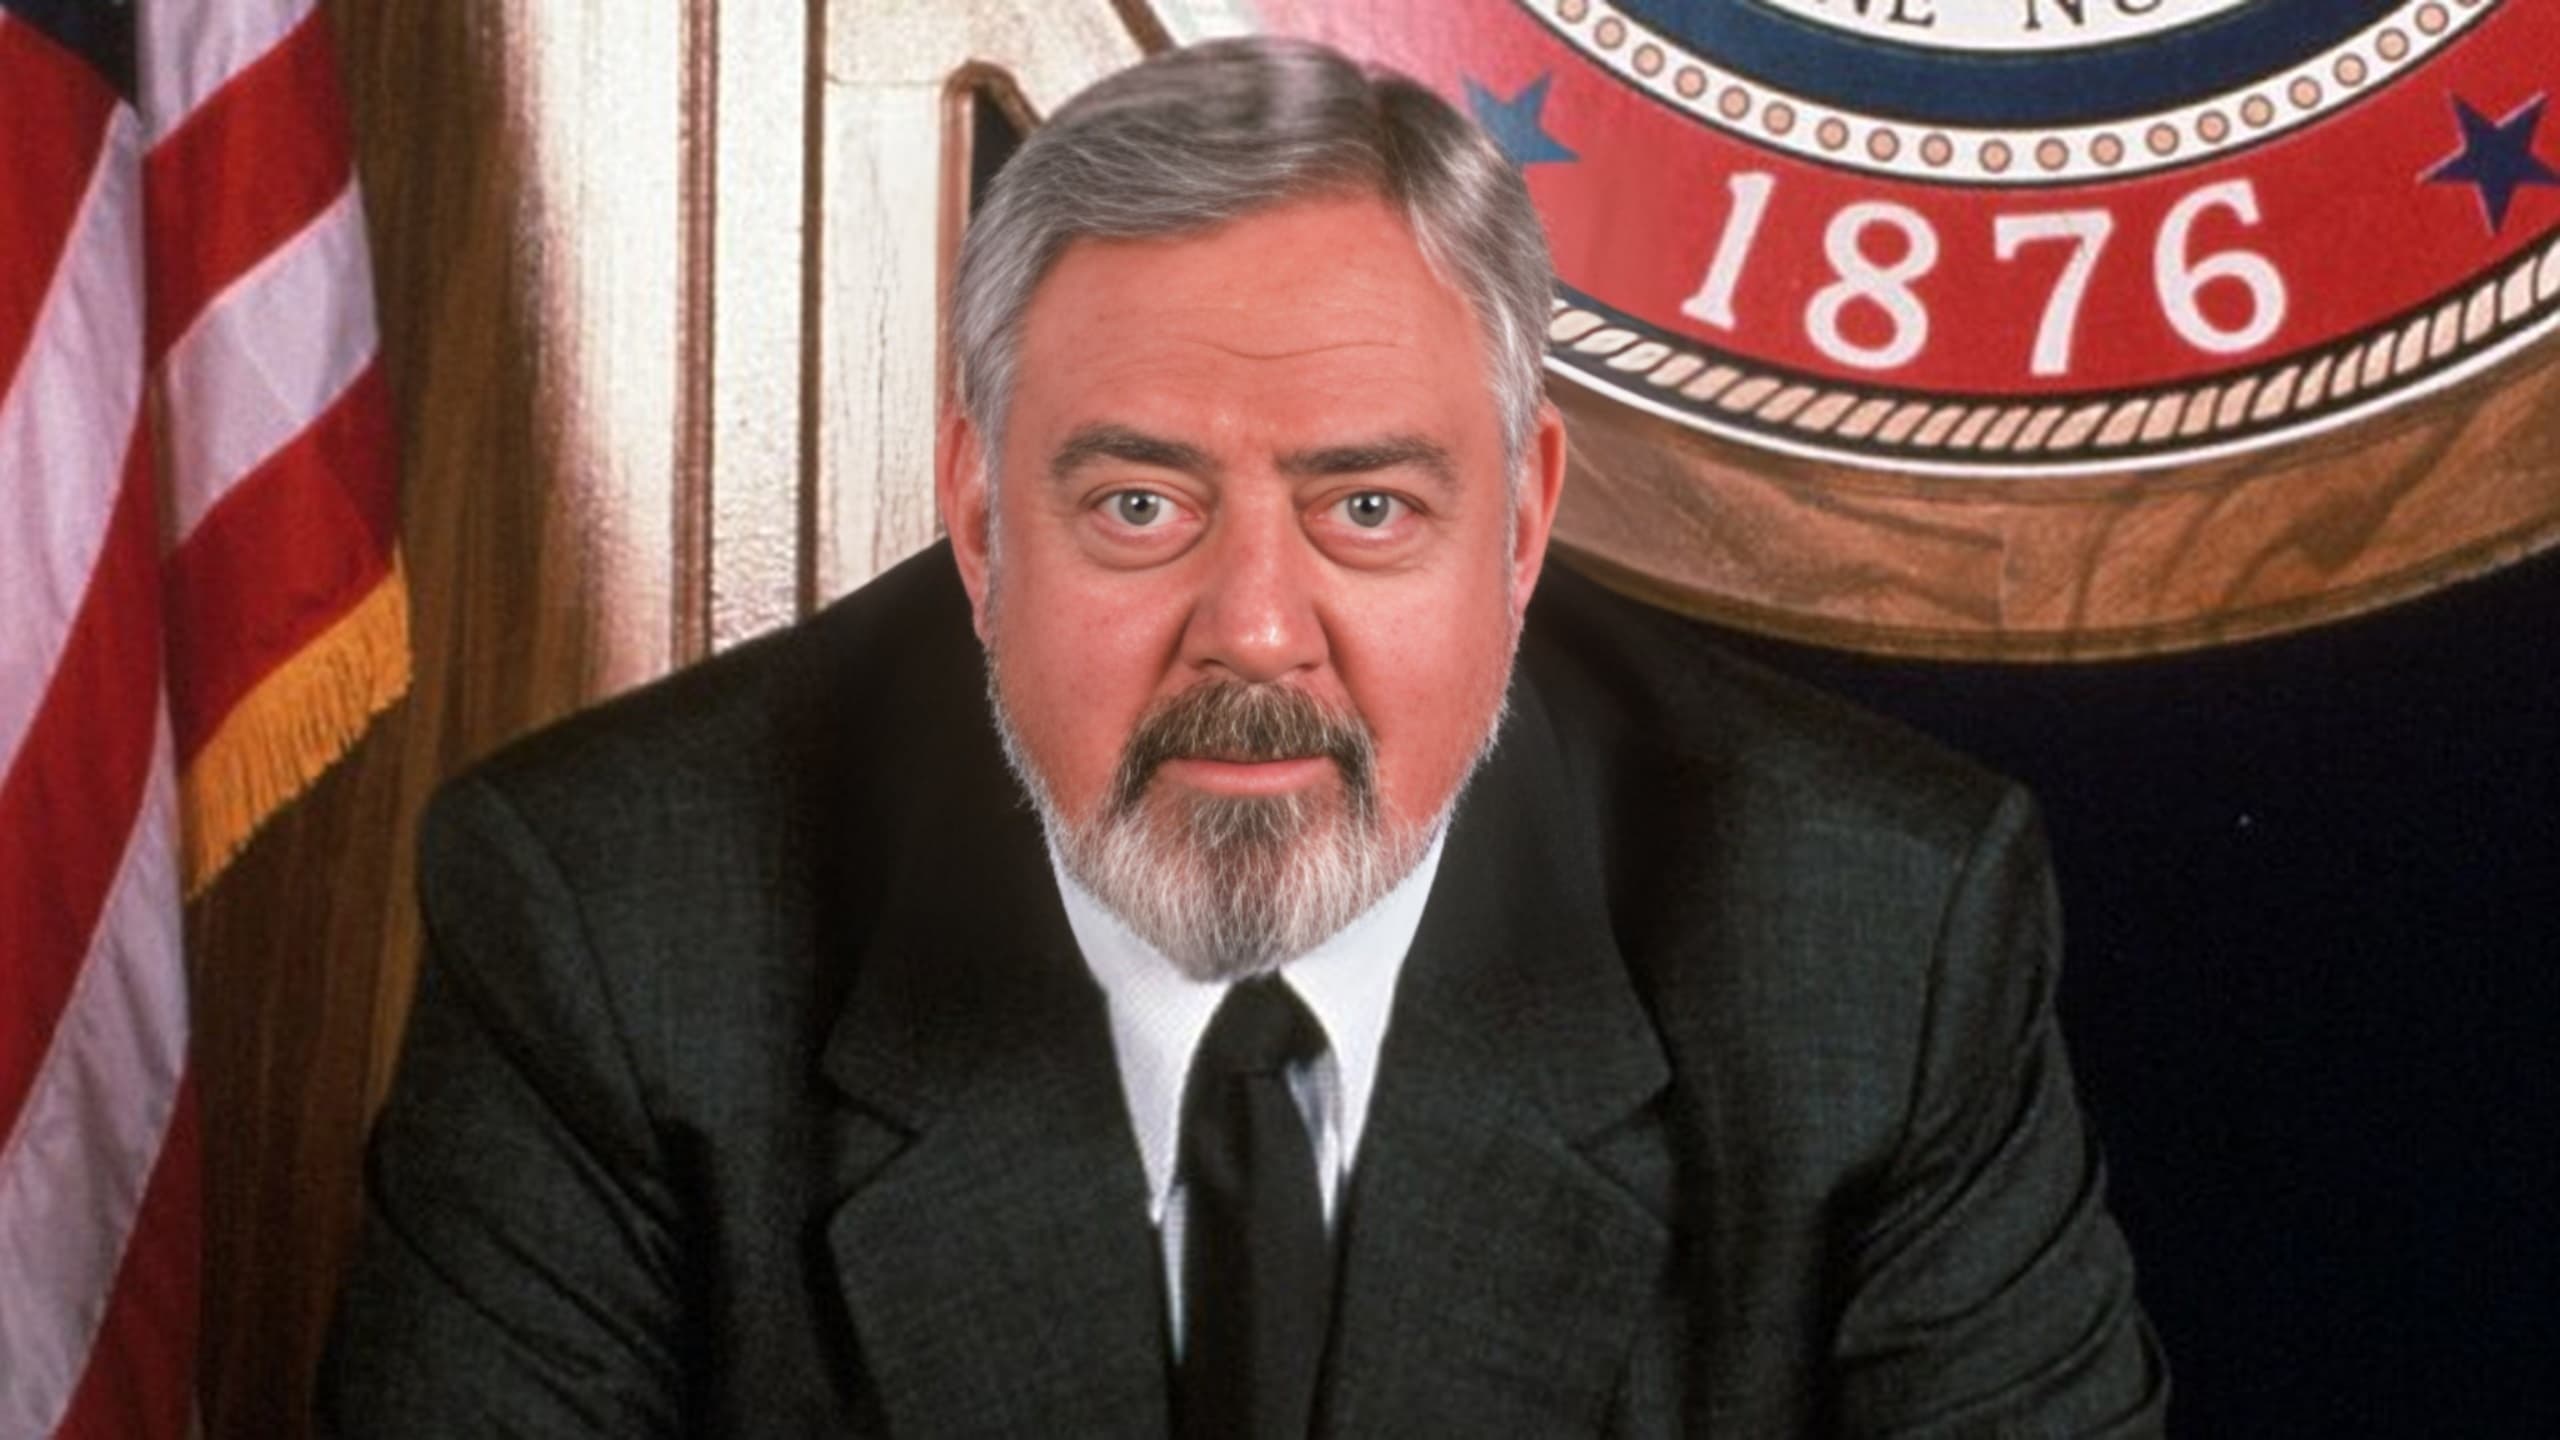 Perry Mason: The Case of the Fatal Framing (1992)